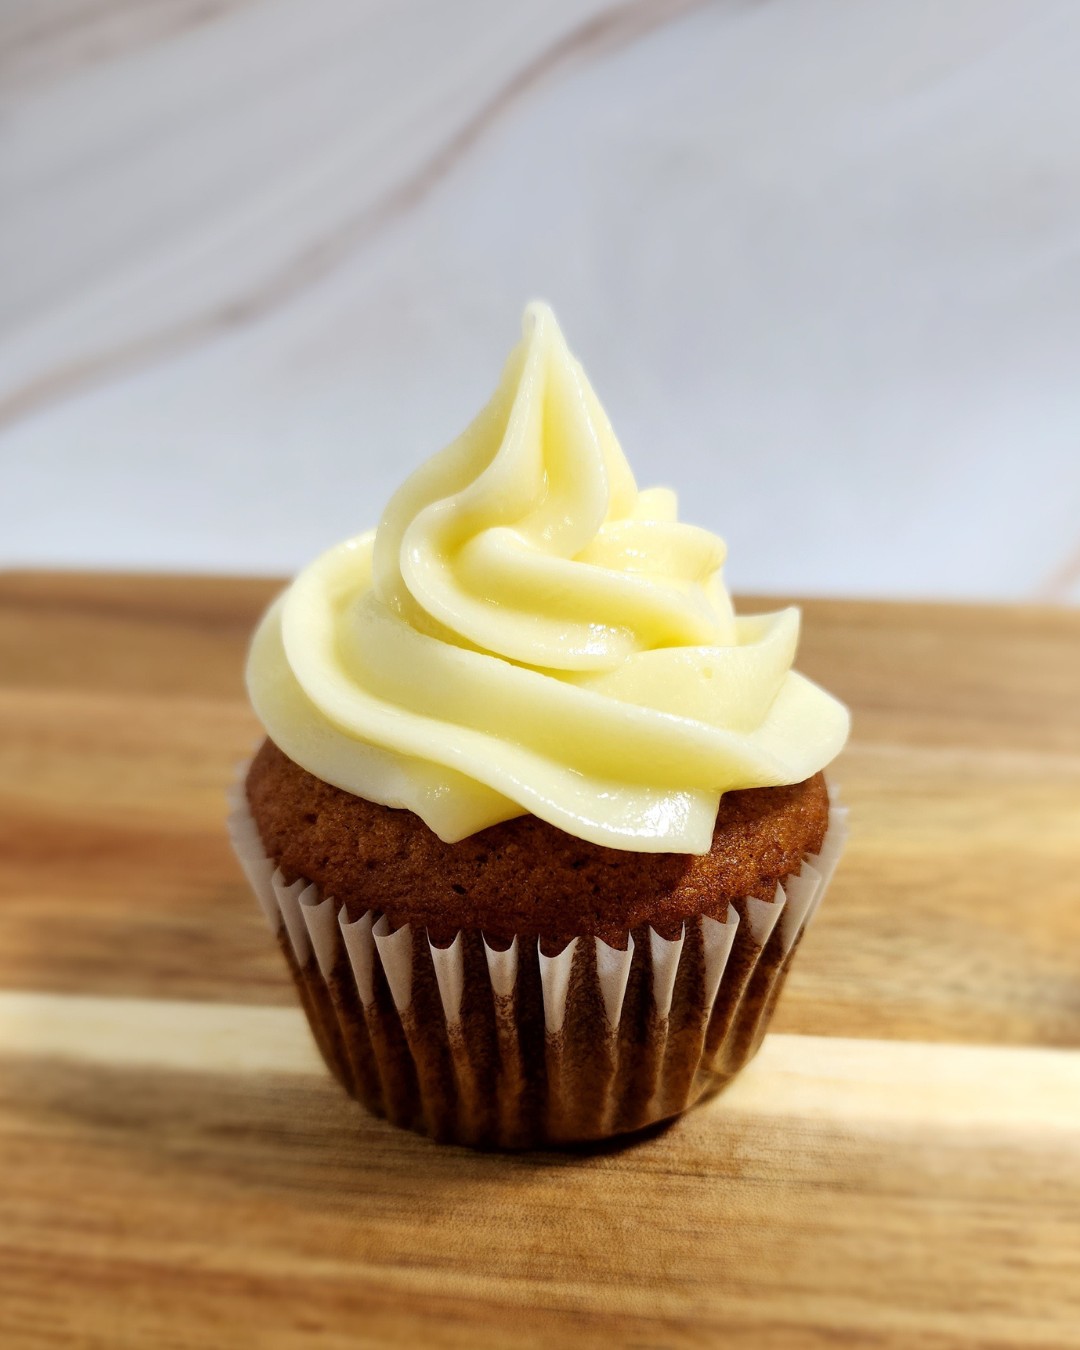 Discover an easy recipe for pumpkin cupcakes with cream cheese frosting that will surely satisfy your sweet tooth this fall season. These cupcakes are not only delightful but also packed with the warm, earthy flavors of pumpkin spice. So, why wait? Start your baking adventure today with this easy recipe for pumpkin cupcakes with cream cheese frosting.